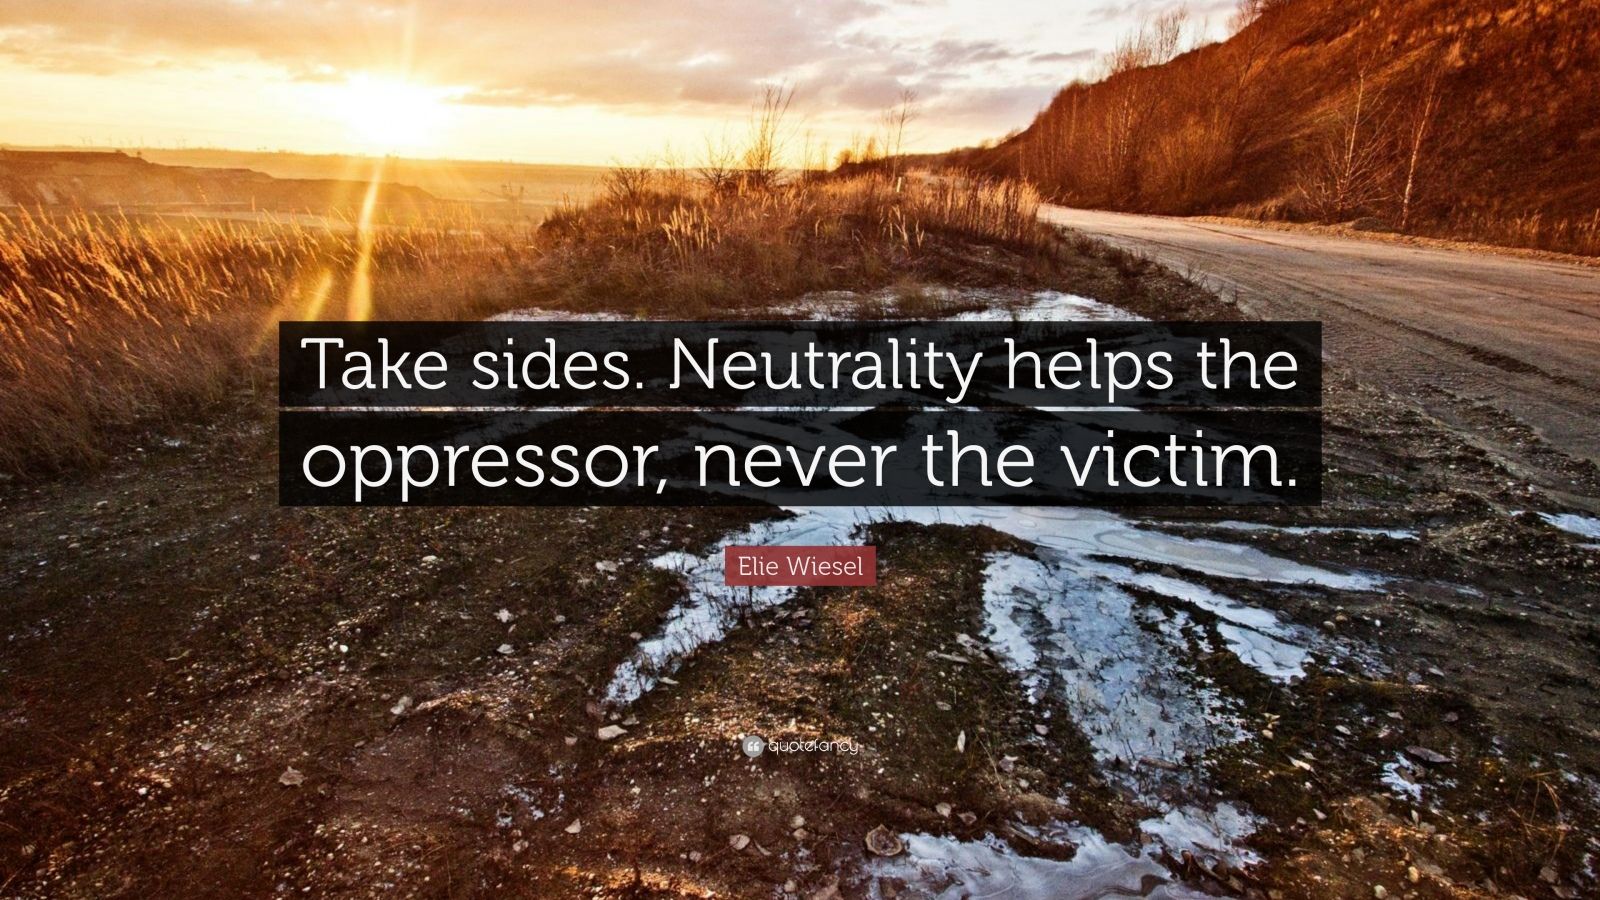 Neutrality helps the oppressor never the victim essay